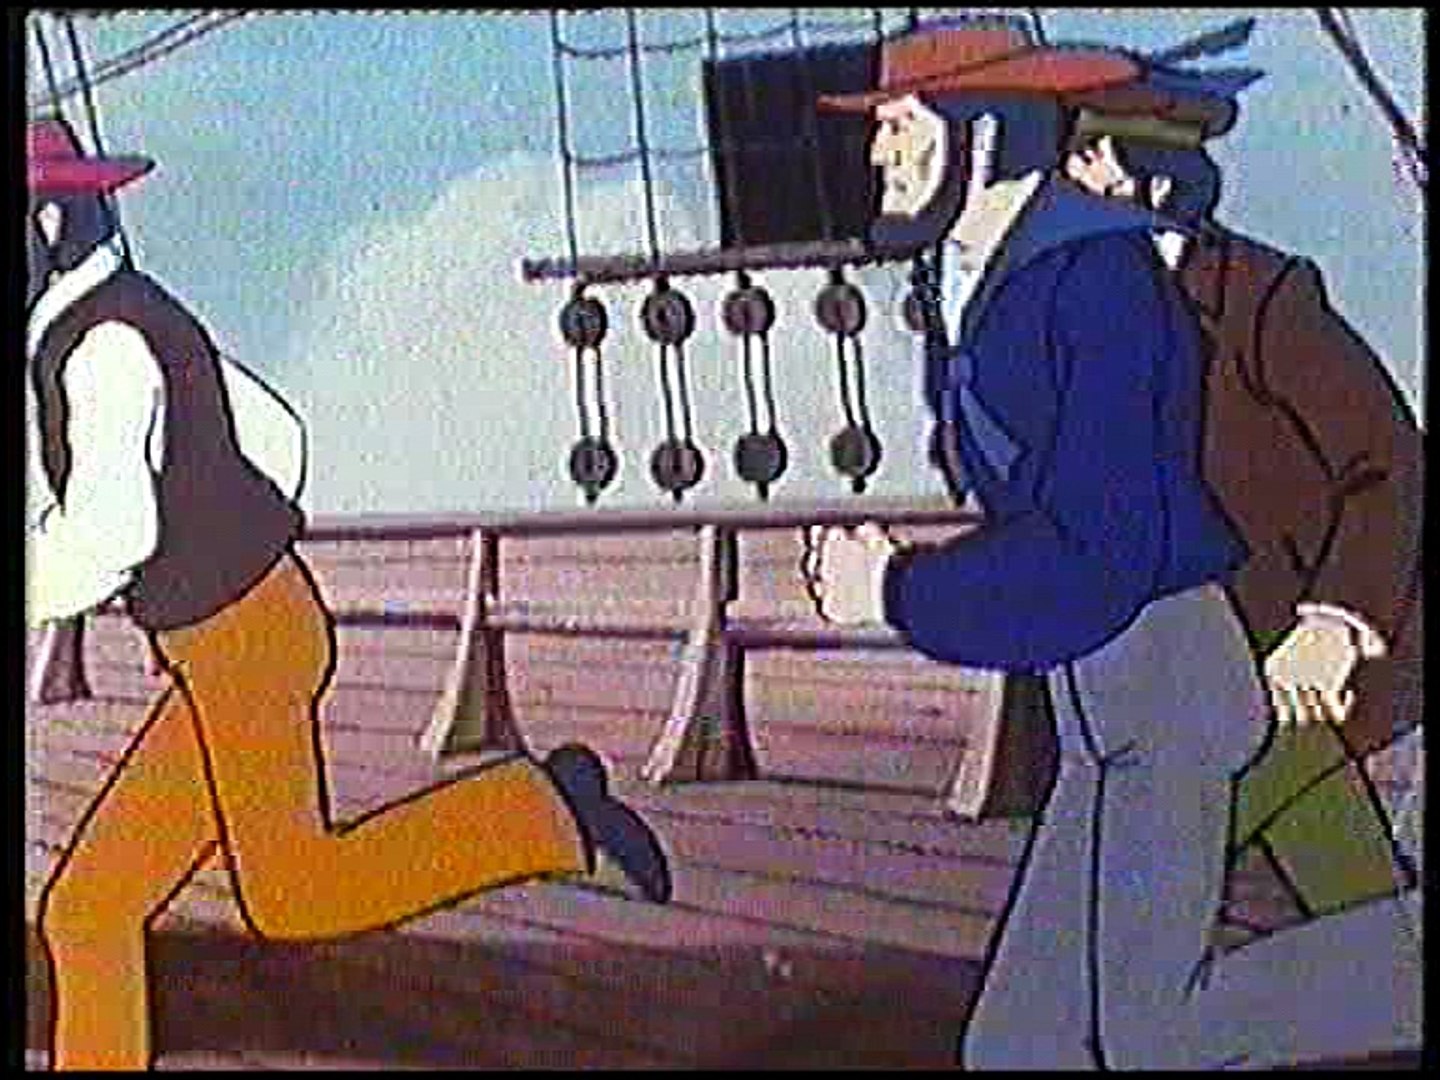 moby dick-1979(herman melvin)parte 2 - Video Dailymotion